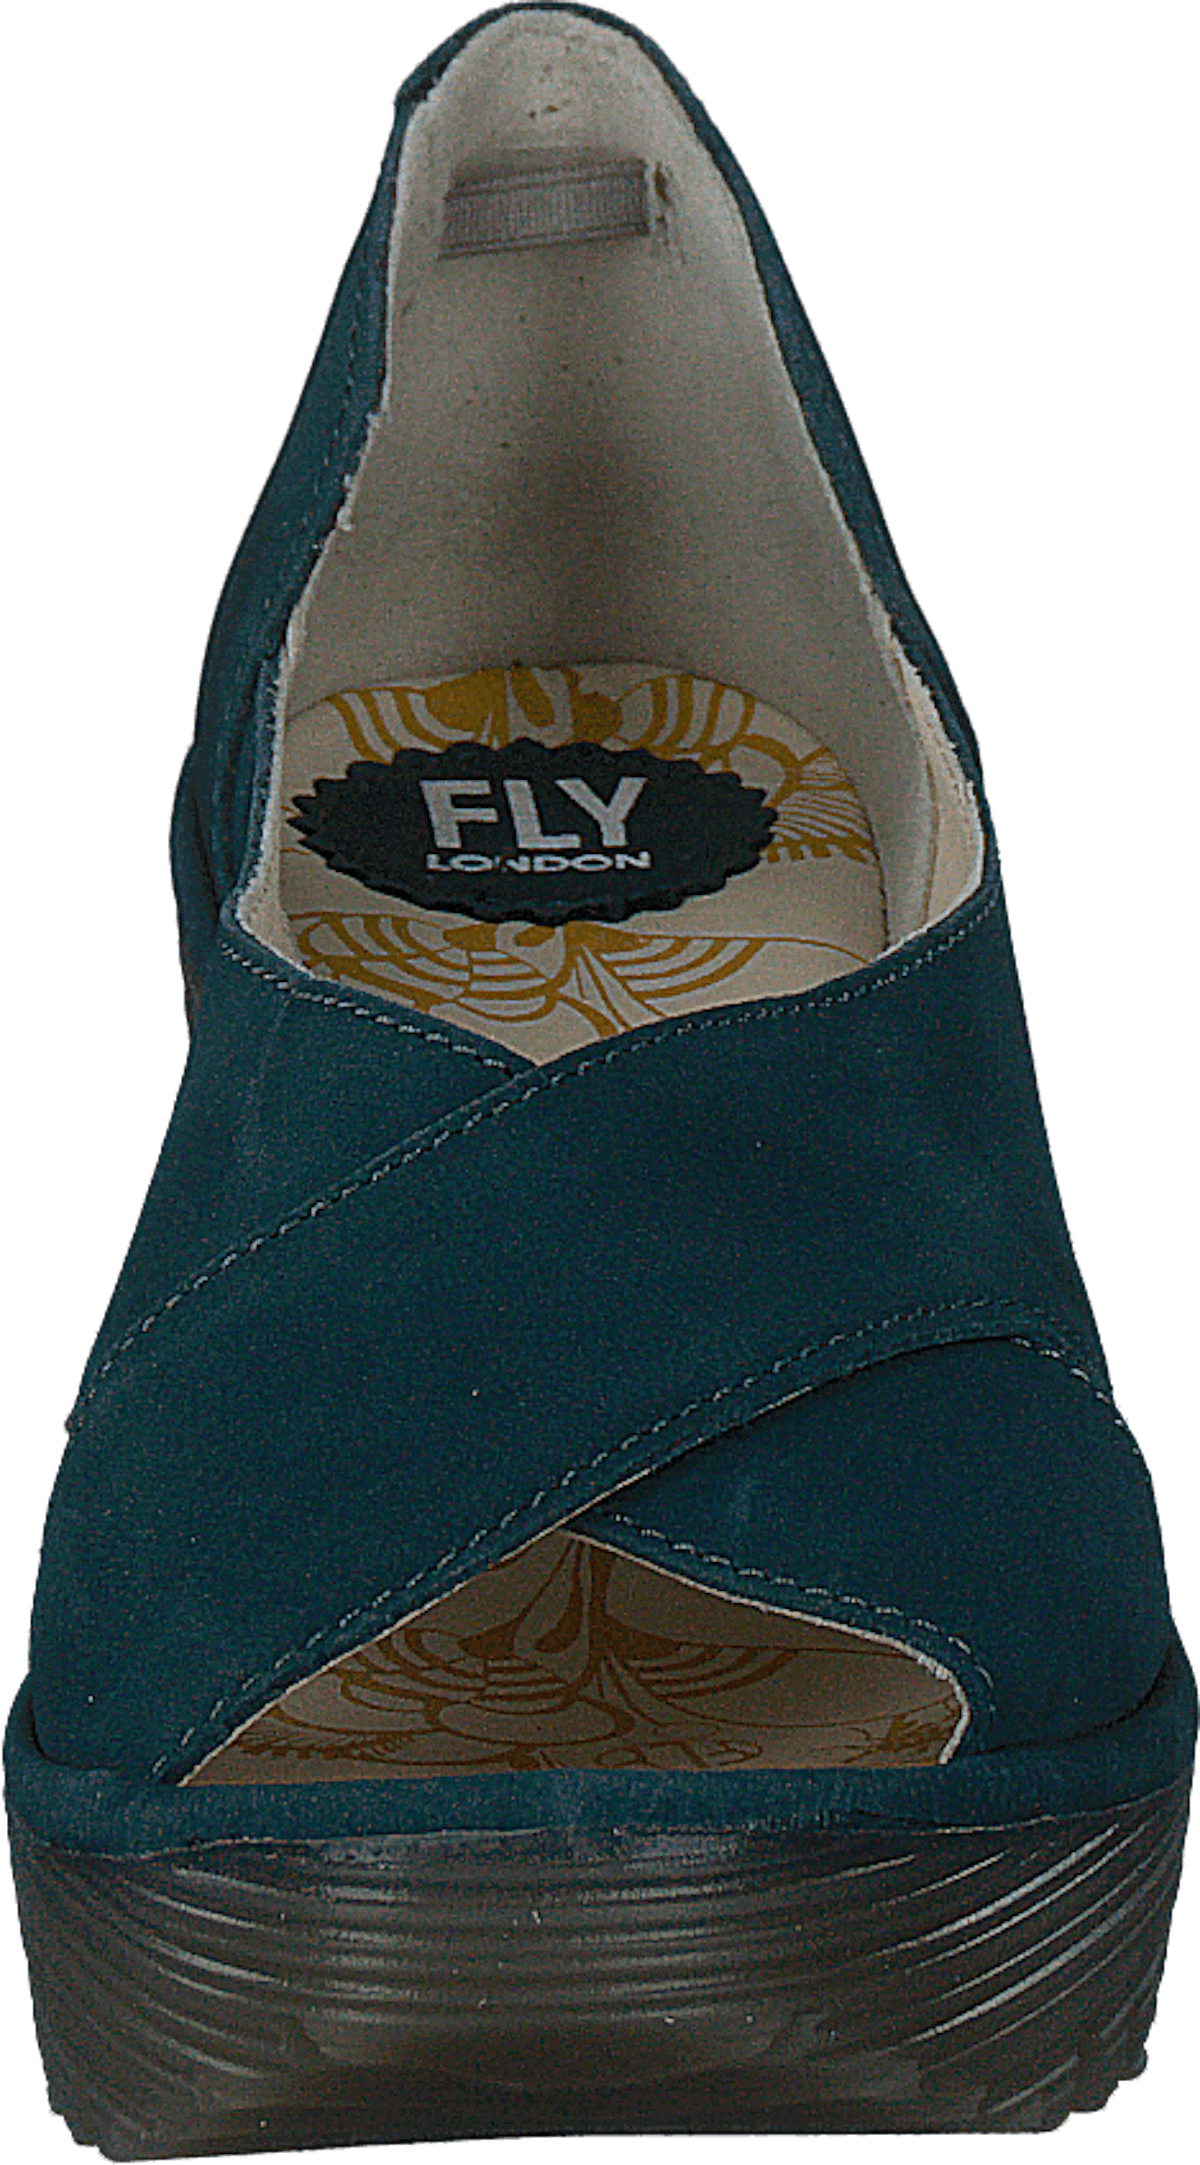 Yoma307fly Teal